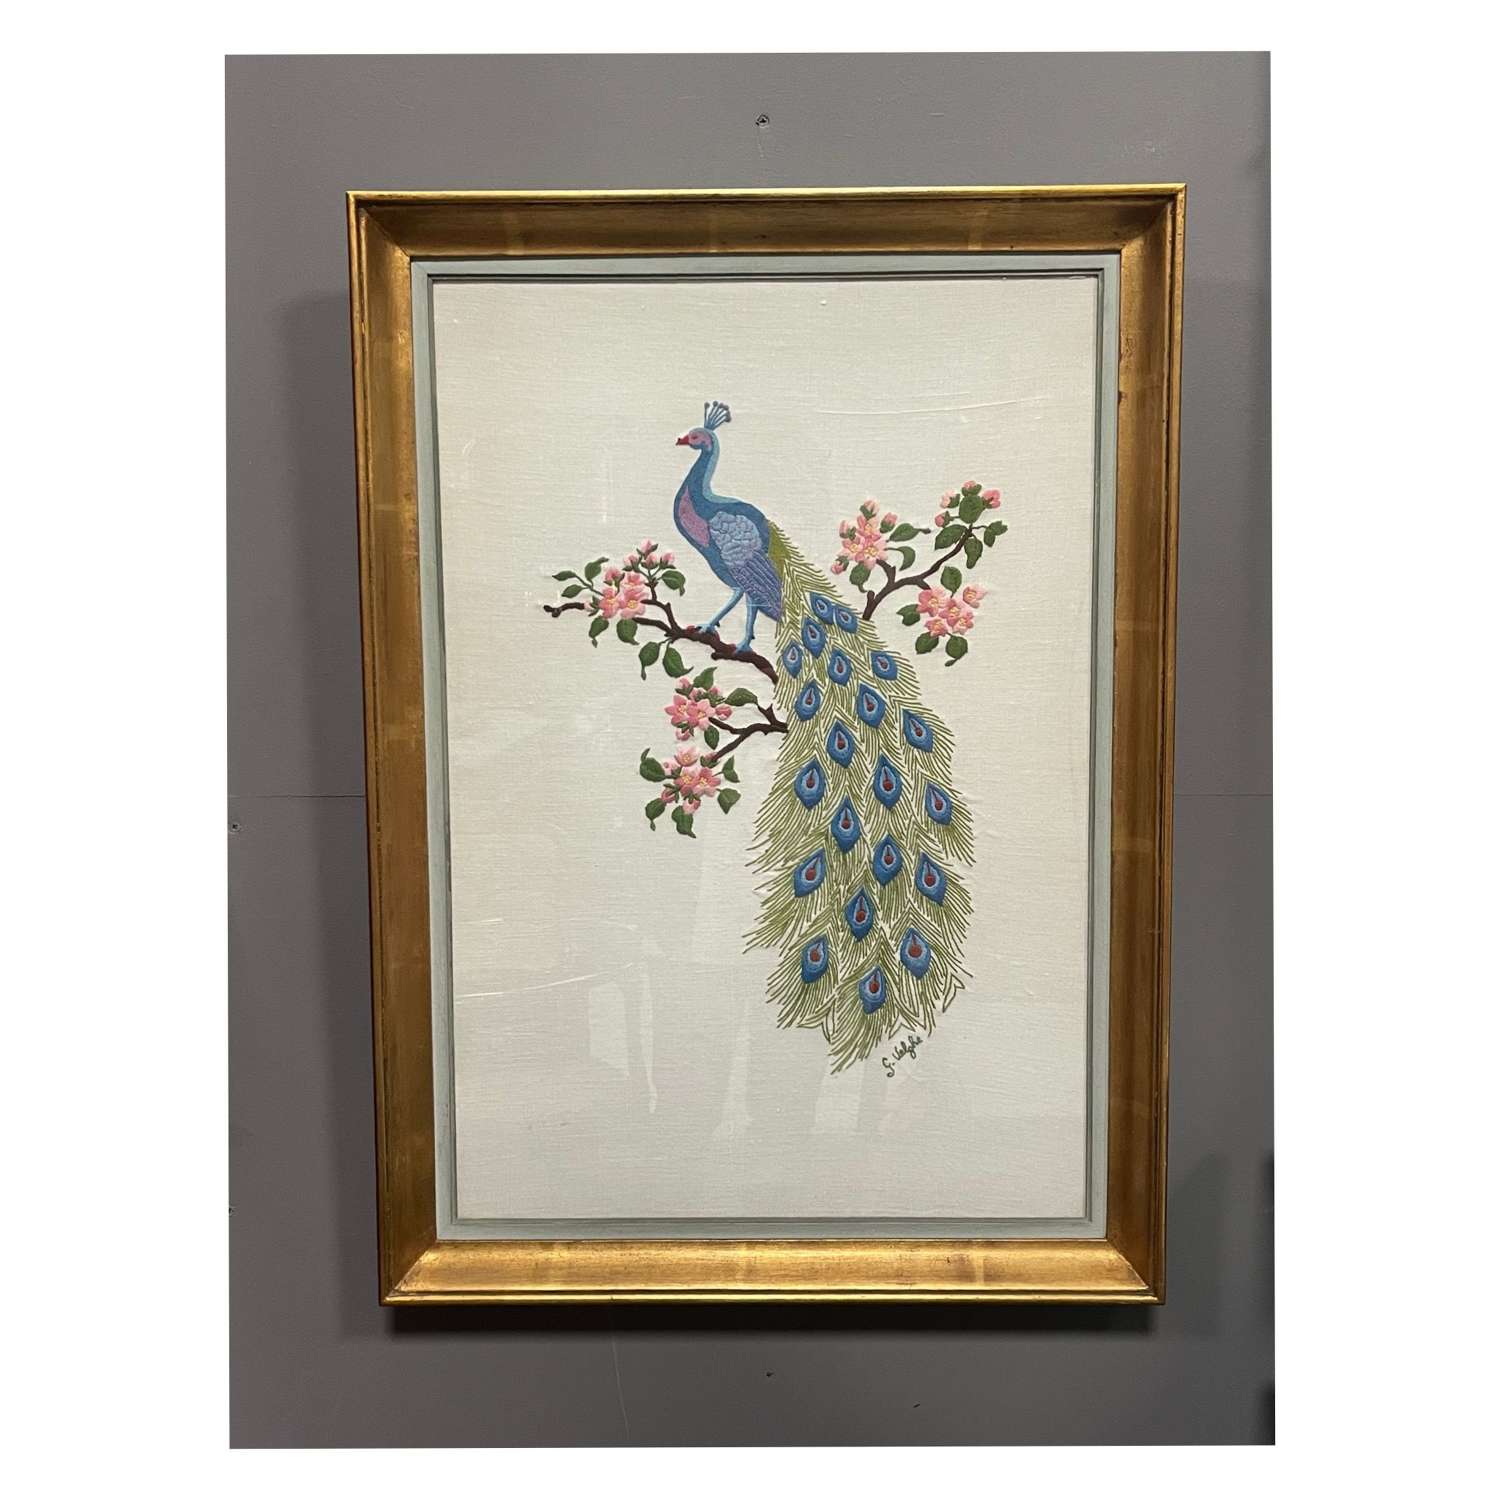 Framed French embroidery of a peacock